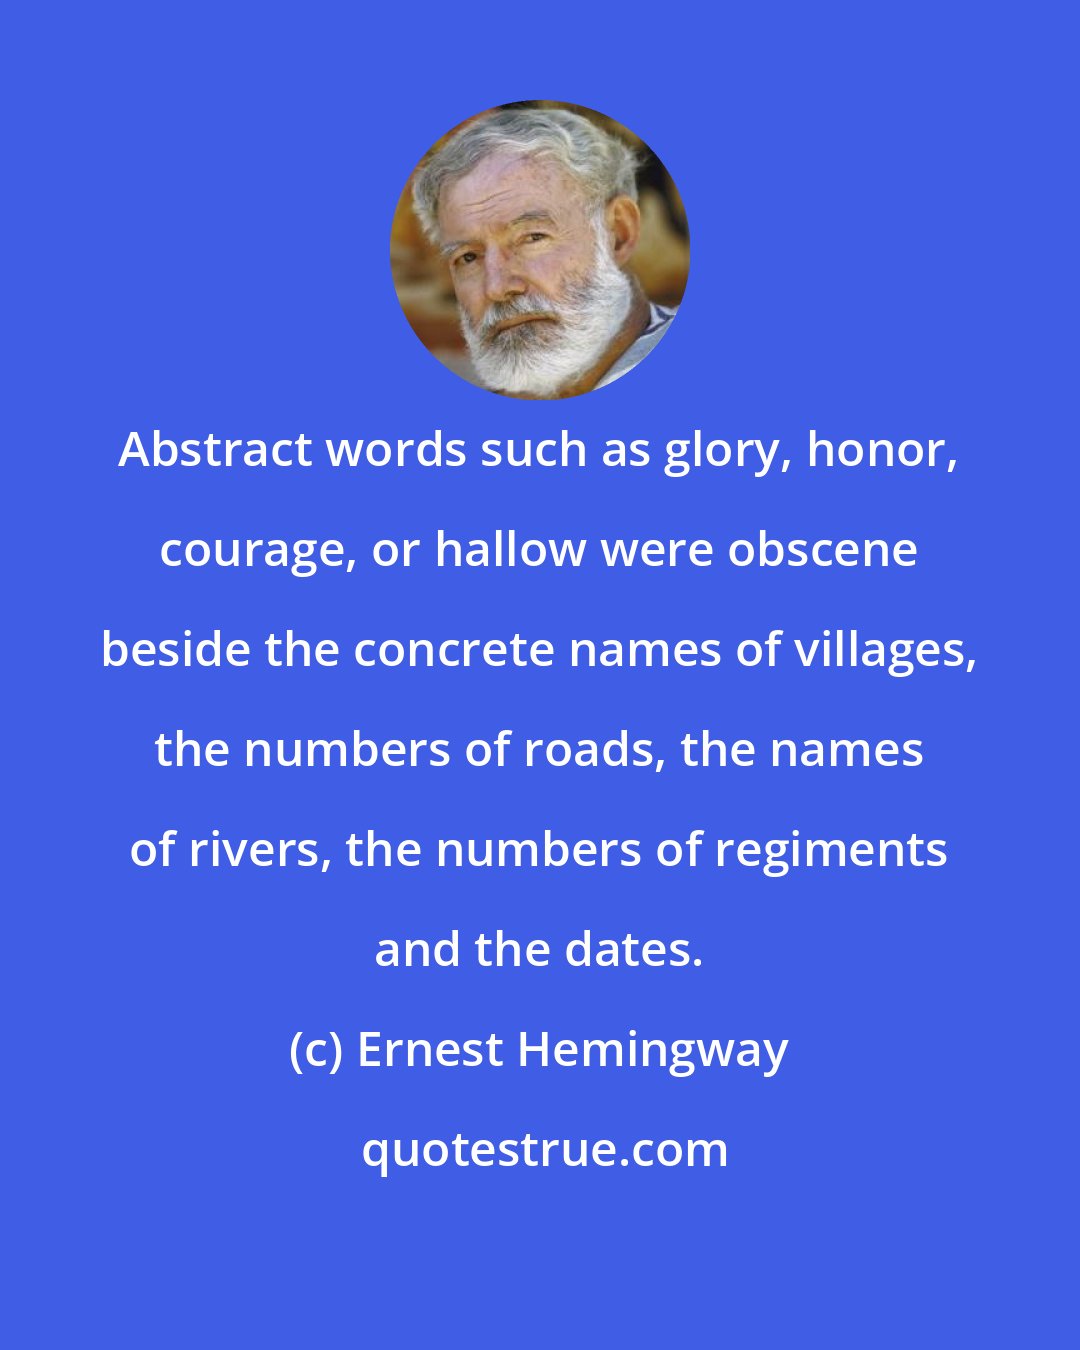 Ernest Hemingway: Abstract words such as glory, honor, courage, or hallow were obscene beside the concrete names of villages, the numbers of roads, the names of rivers, the numbers of regiments and the dates.